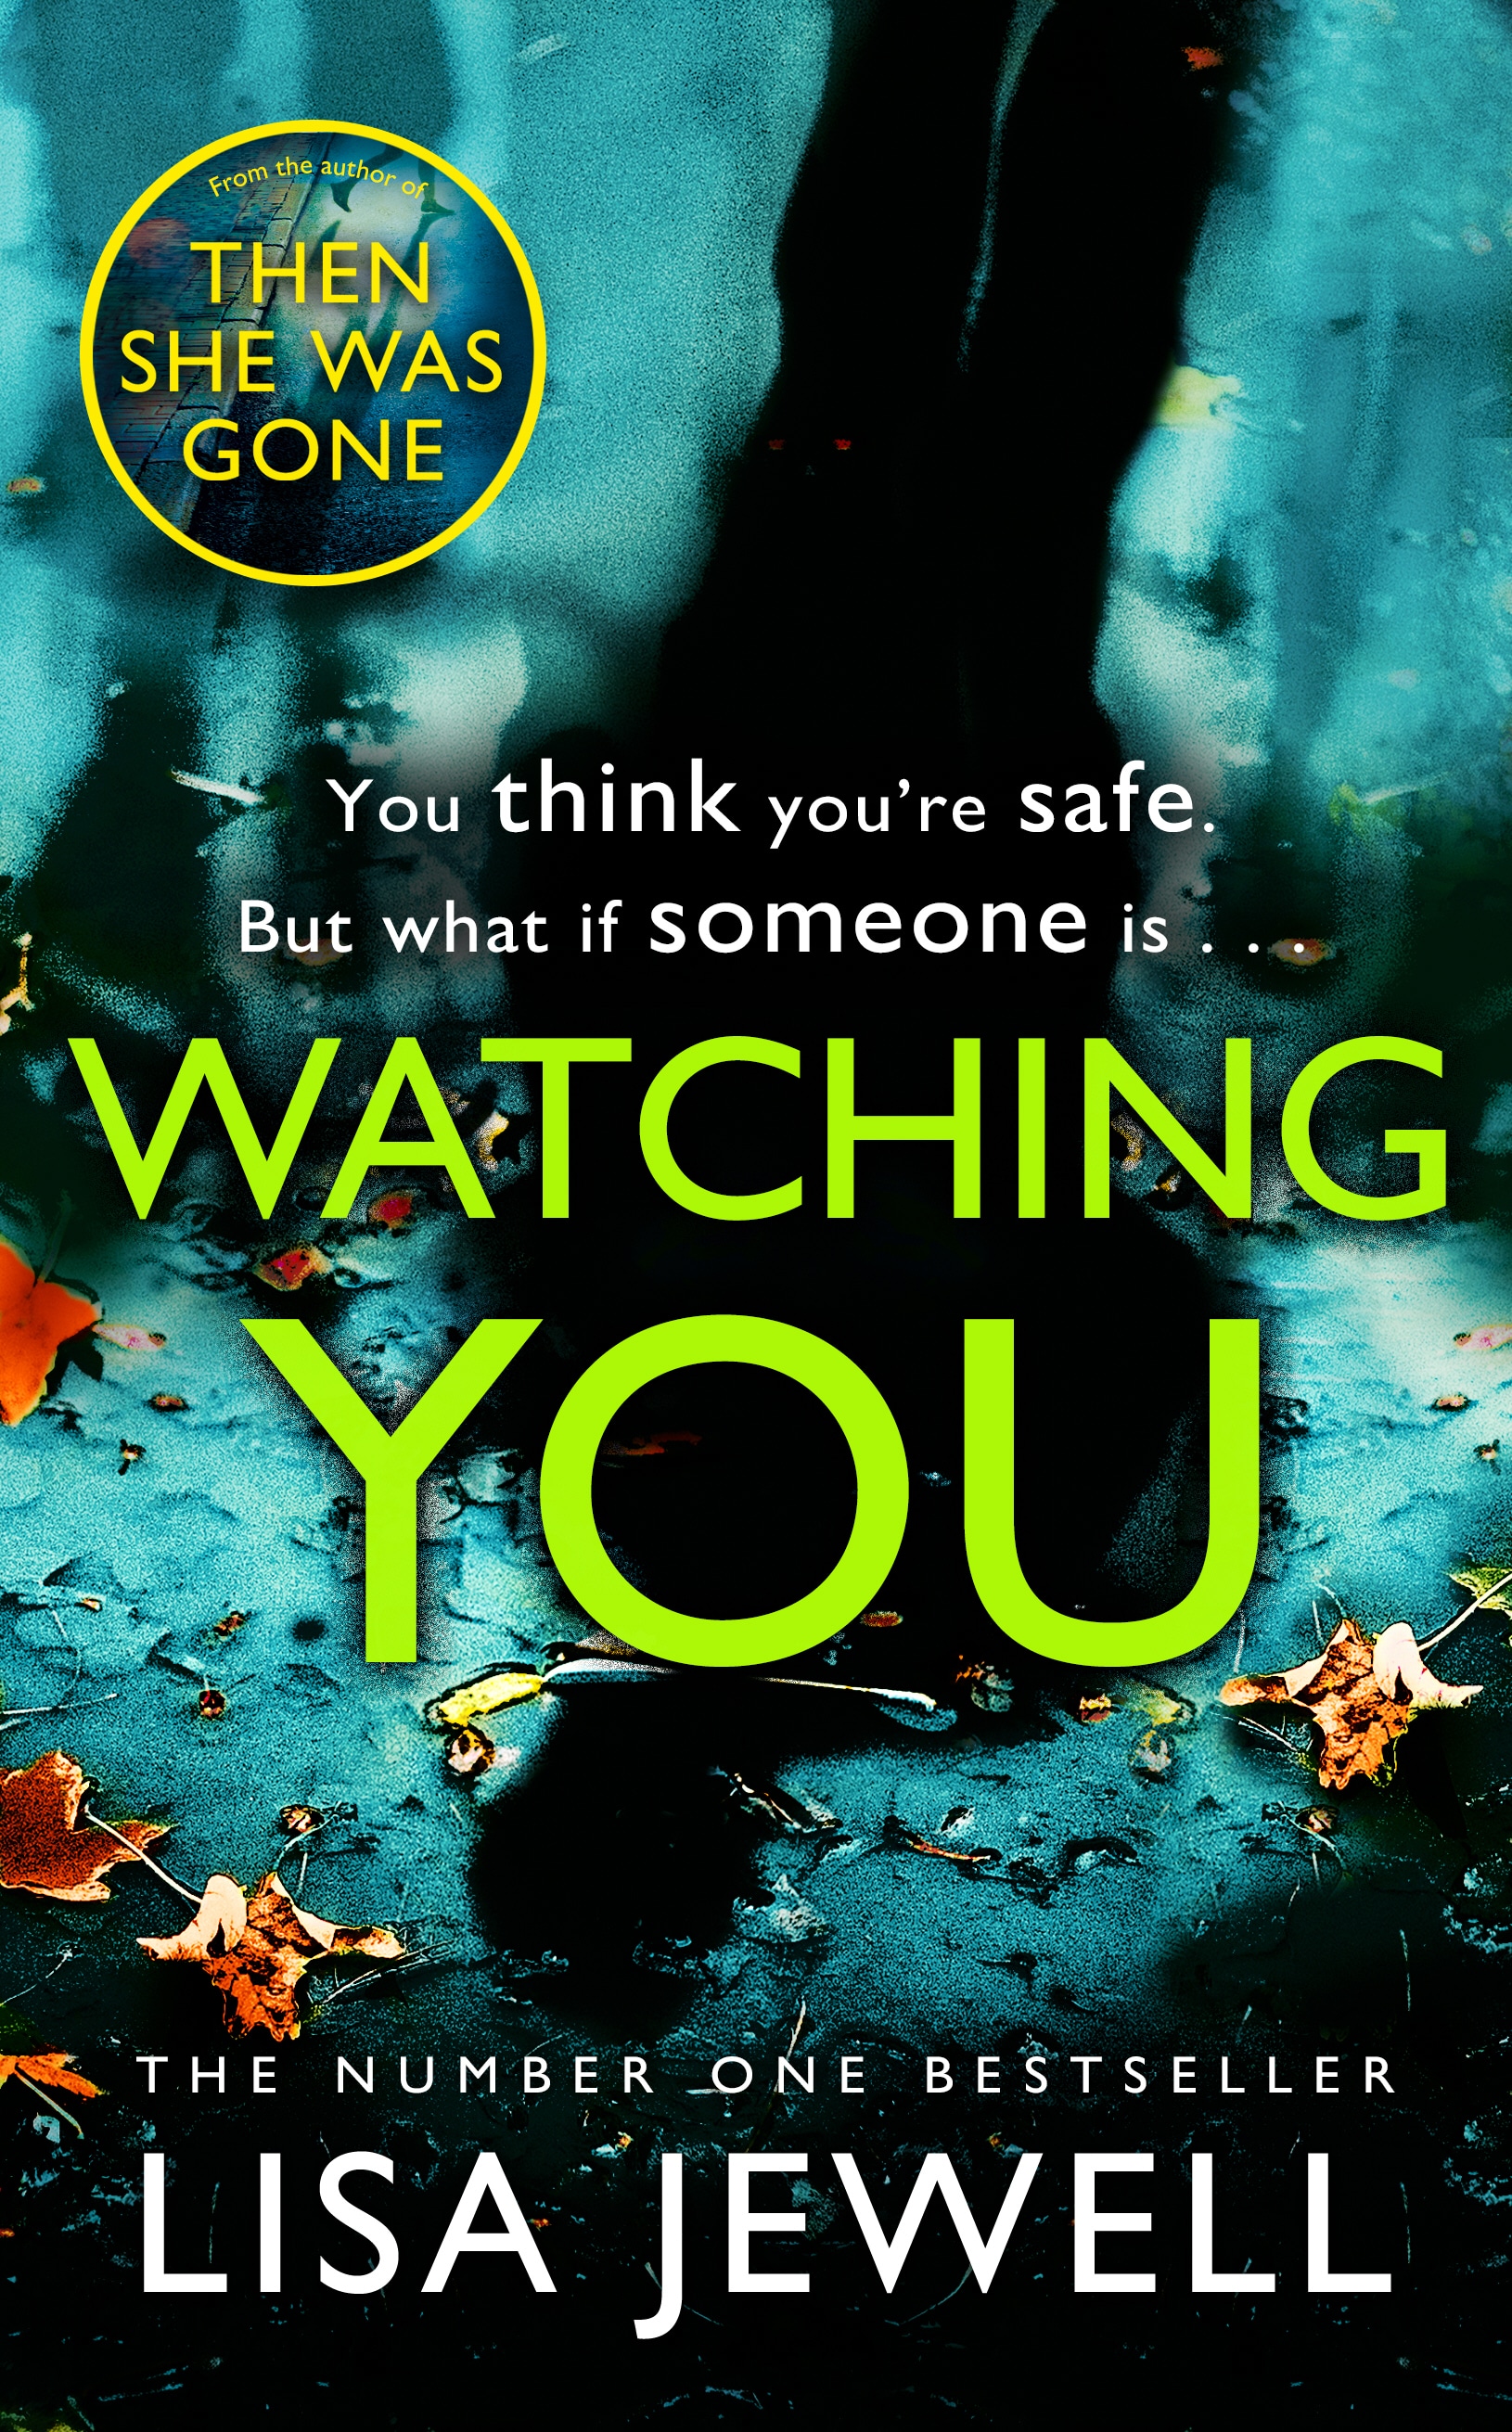 Book “Watching You” by Lisa Jewell — January 24, 2019